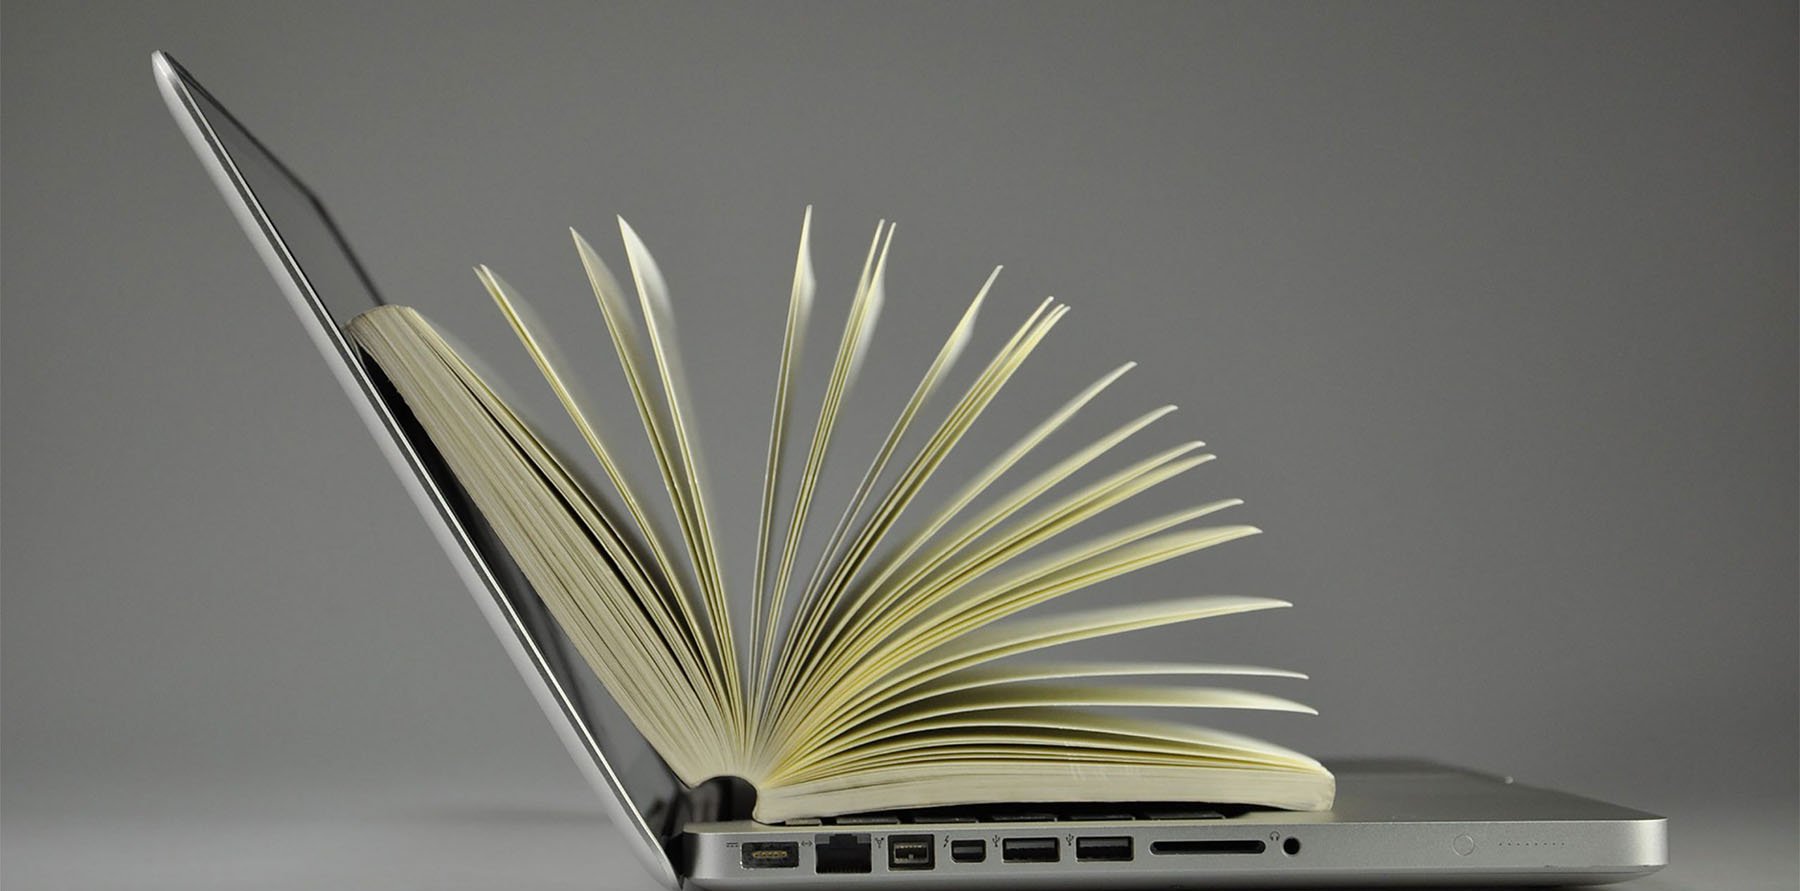 An open laptop with an open book on top